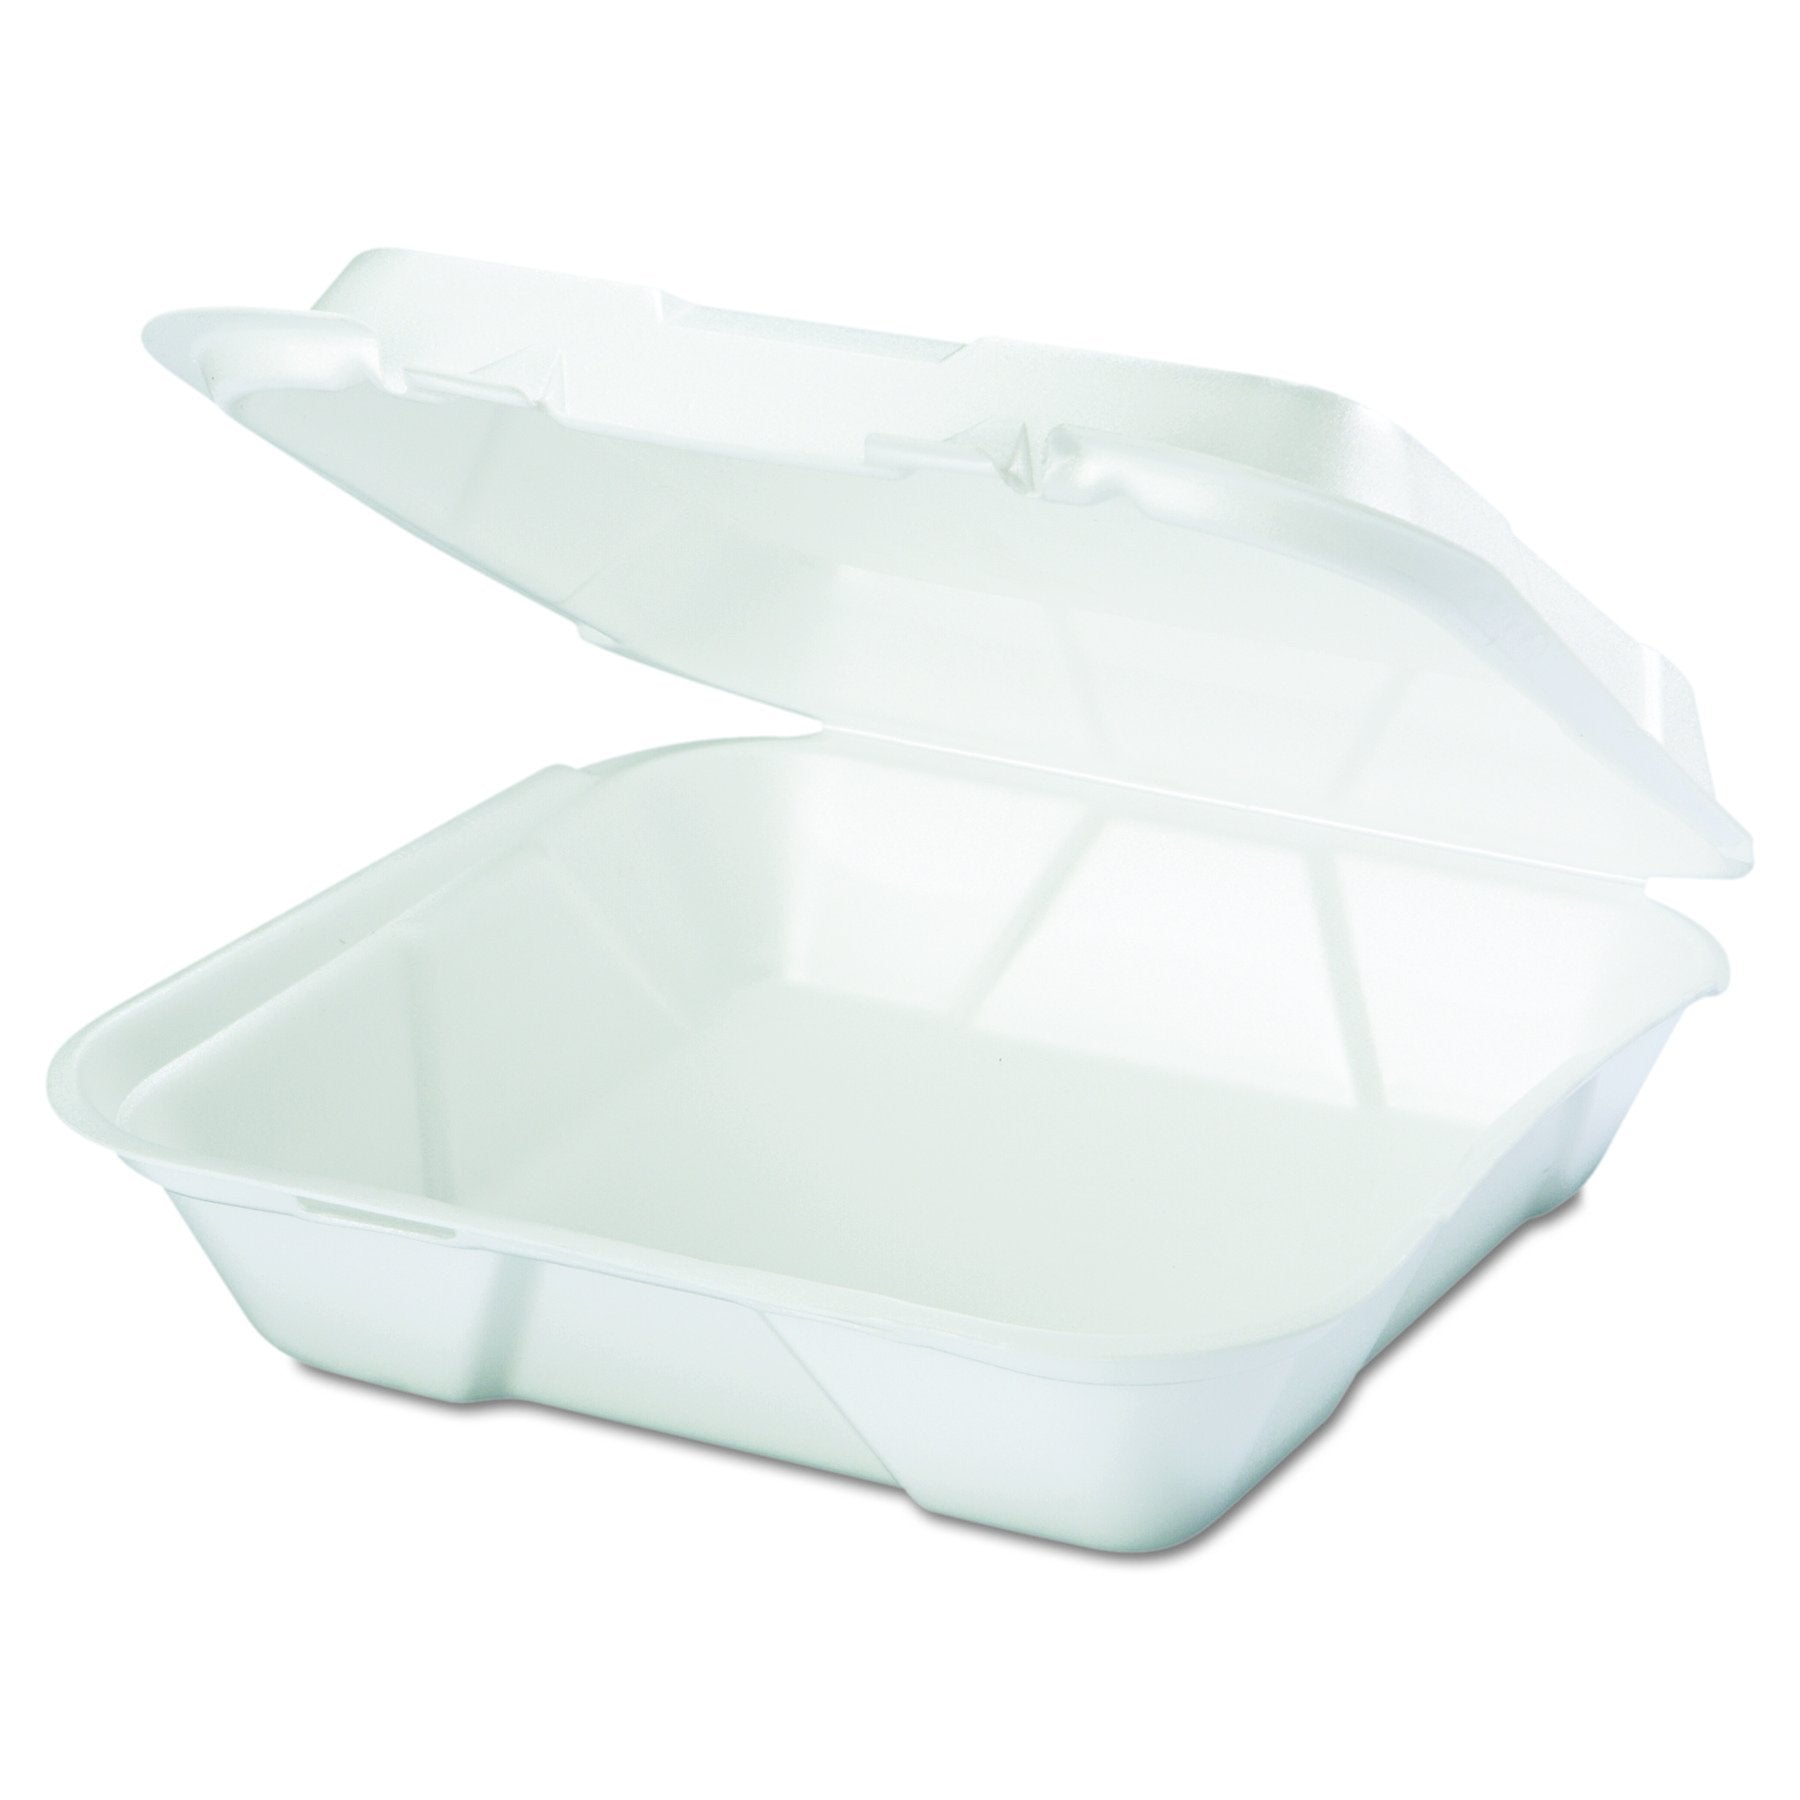 TAKE-OUT/ Container Medium, 1 Comp, White 200/cs-Food Service